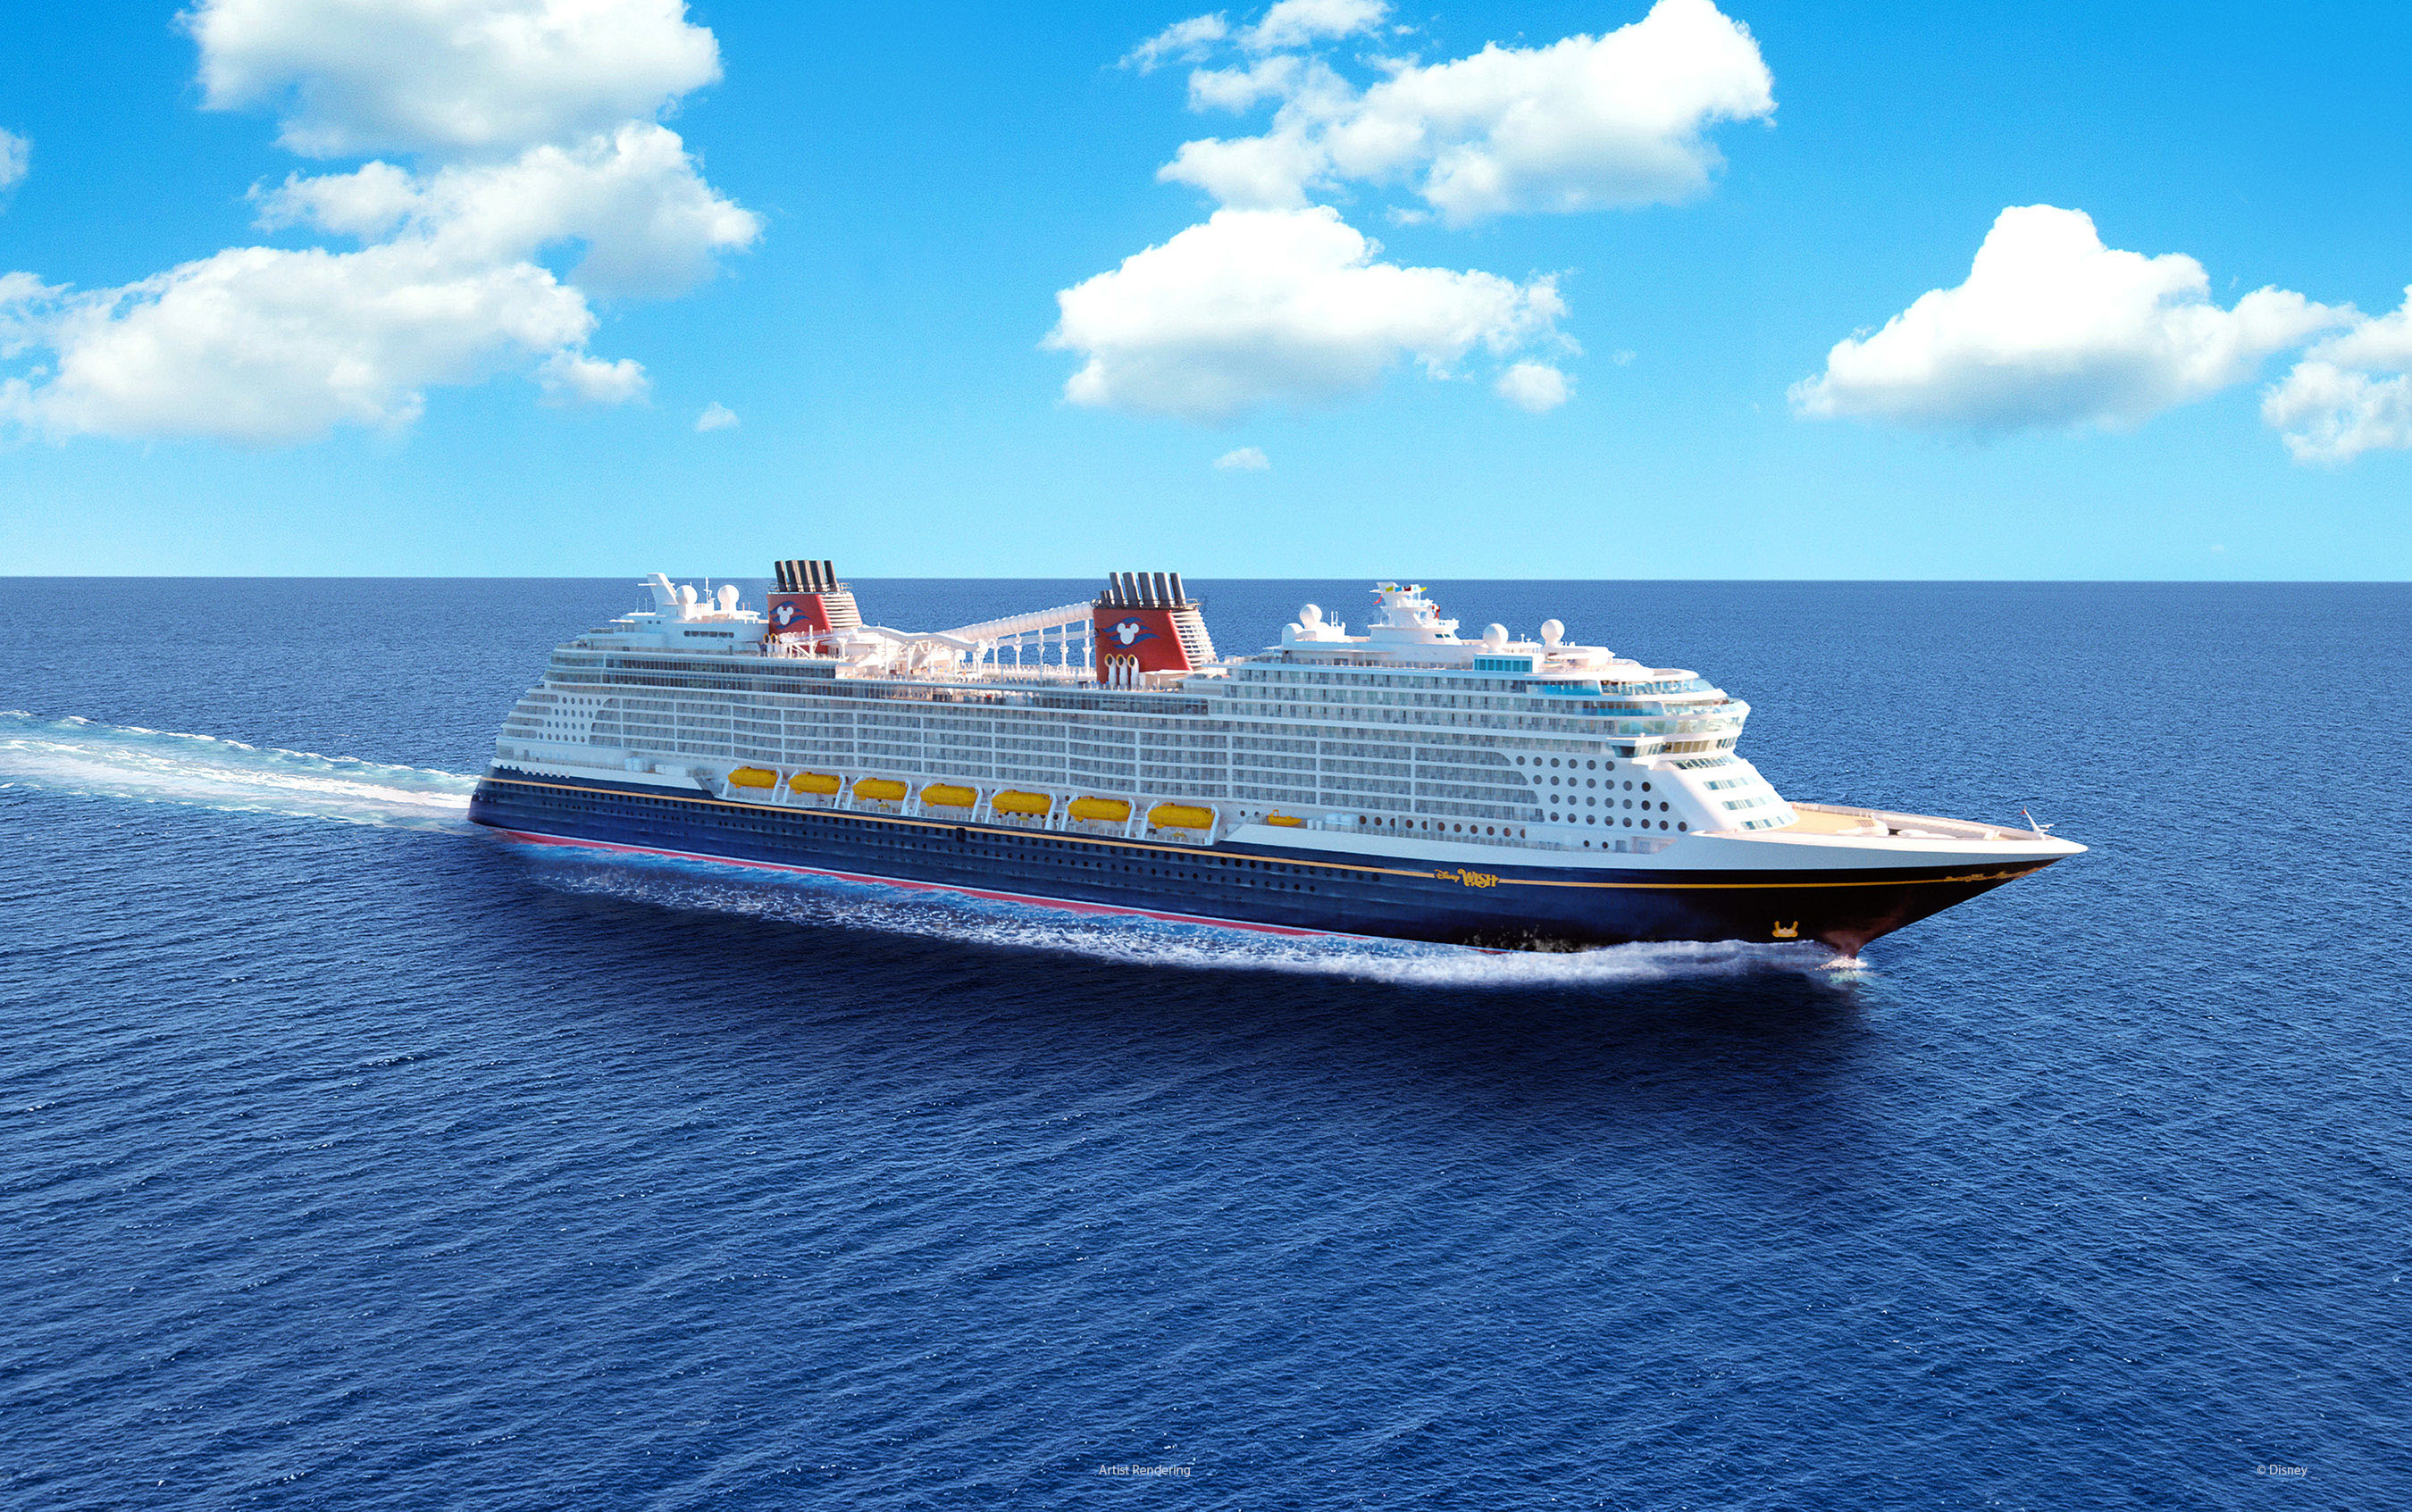 Disney Cruise Line’s newest ship brings more magic to the seas New